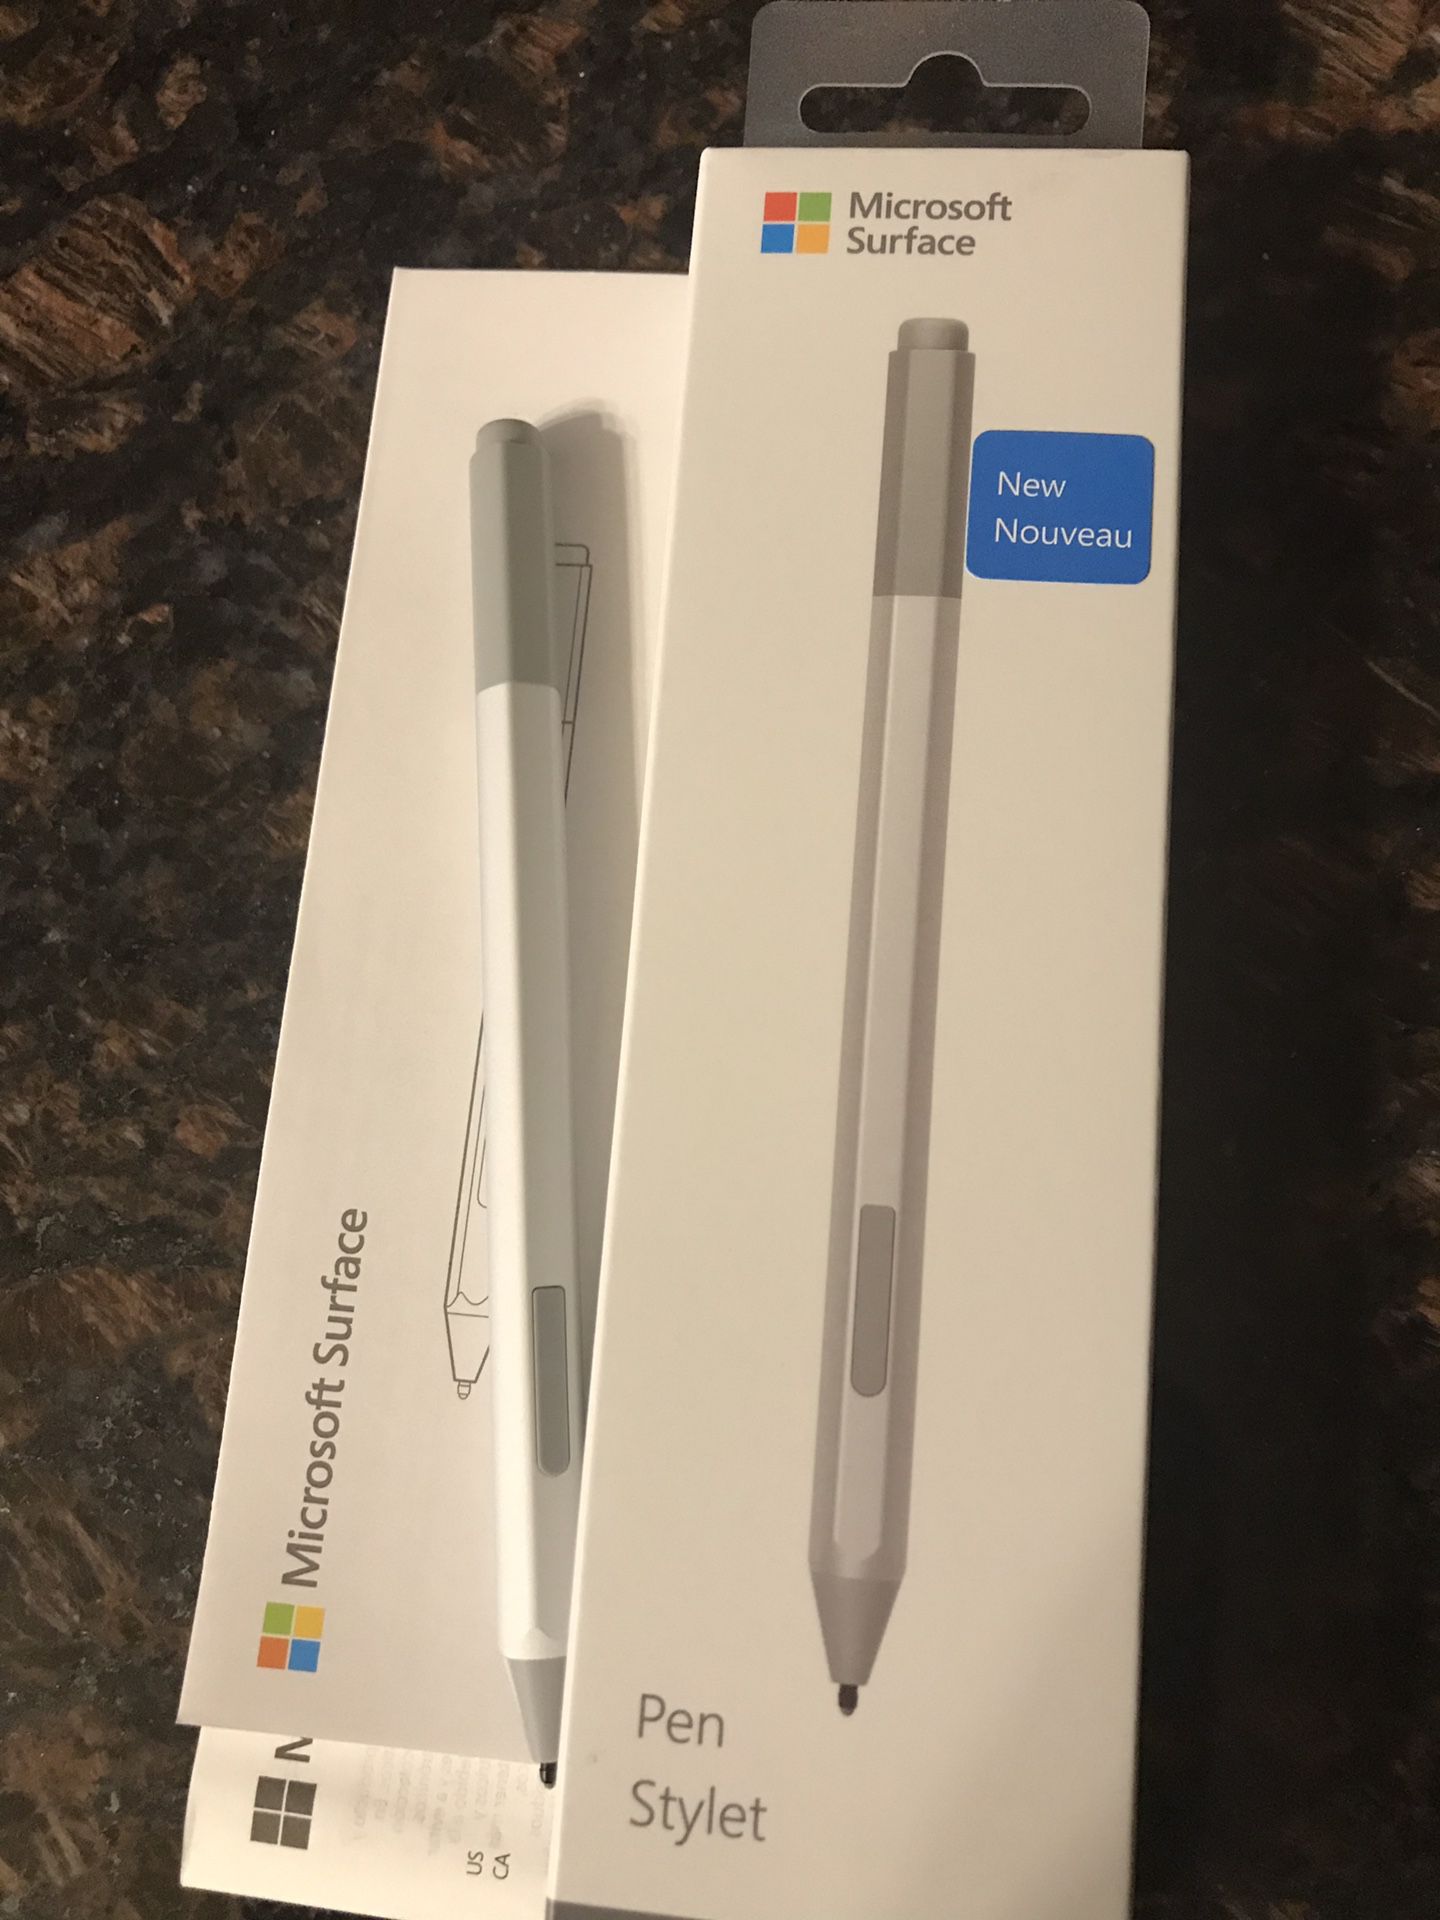 Used once Microsoft Surface Pro 6 pen